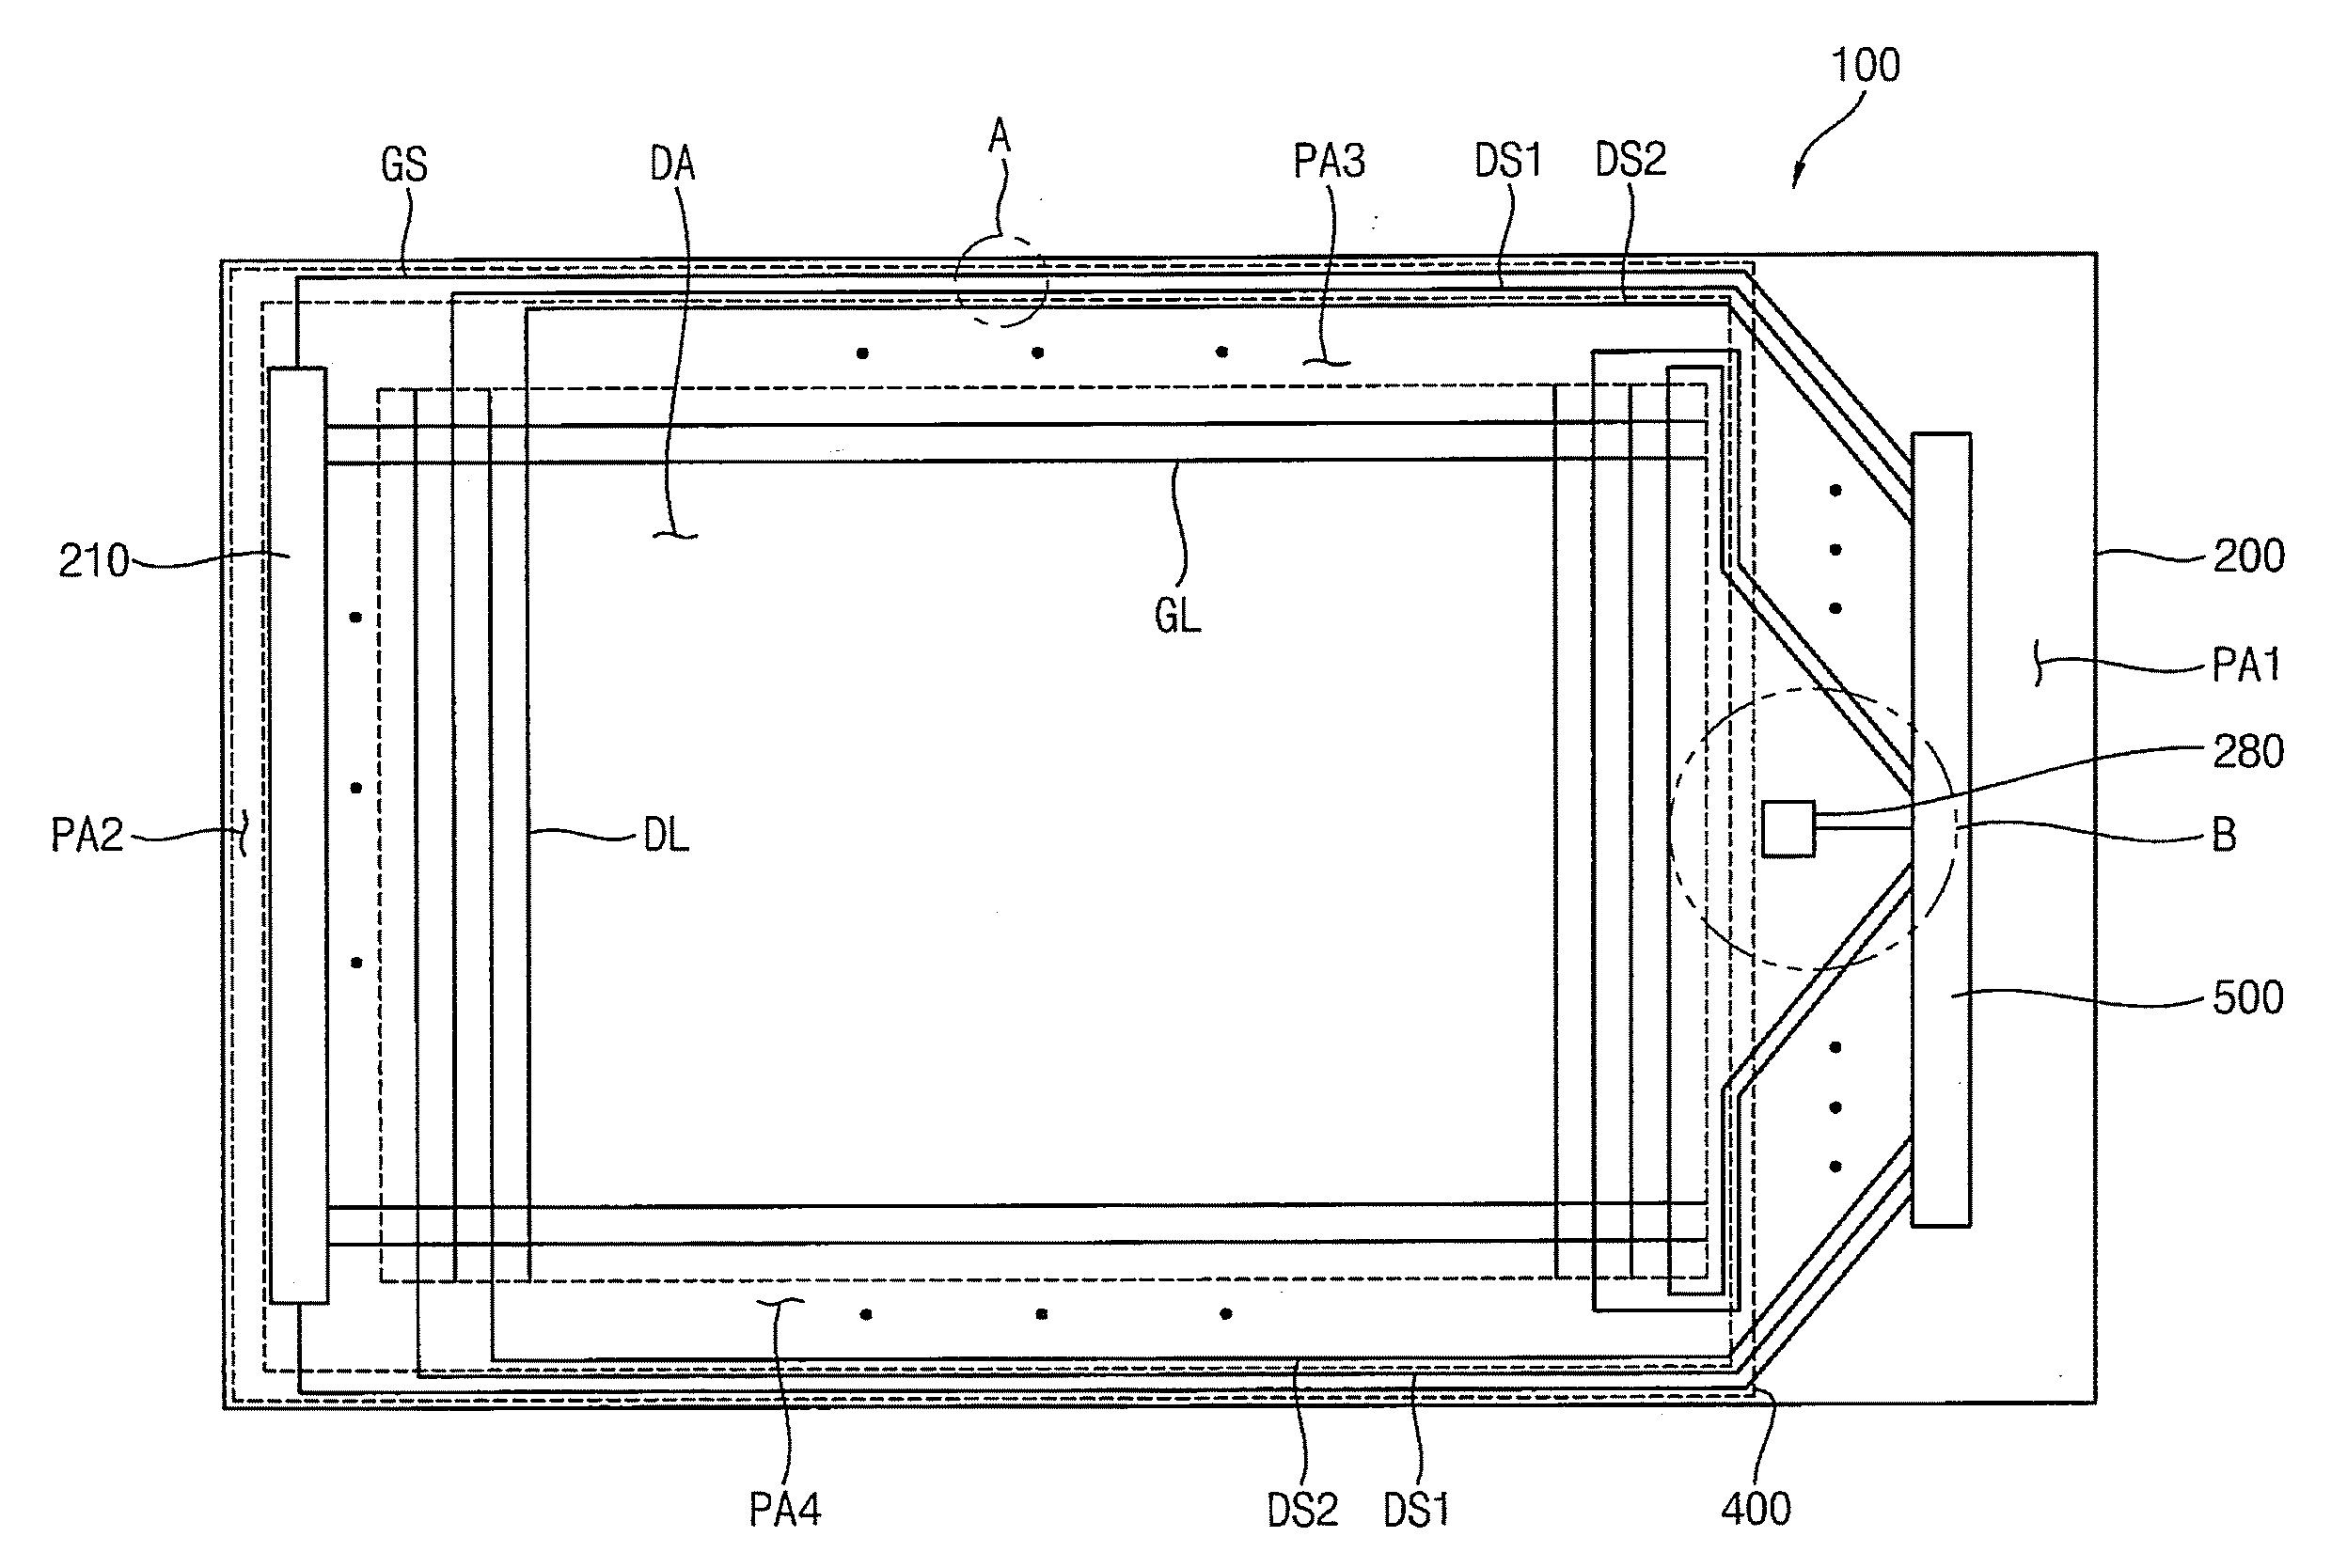 Display apparatus including signal lines arranged for curing a seal line